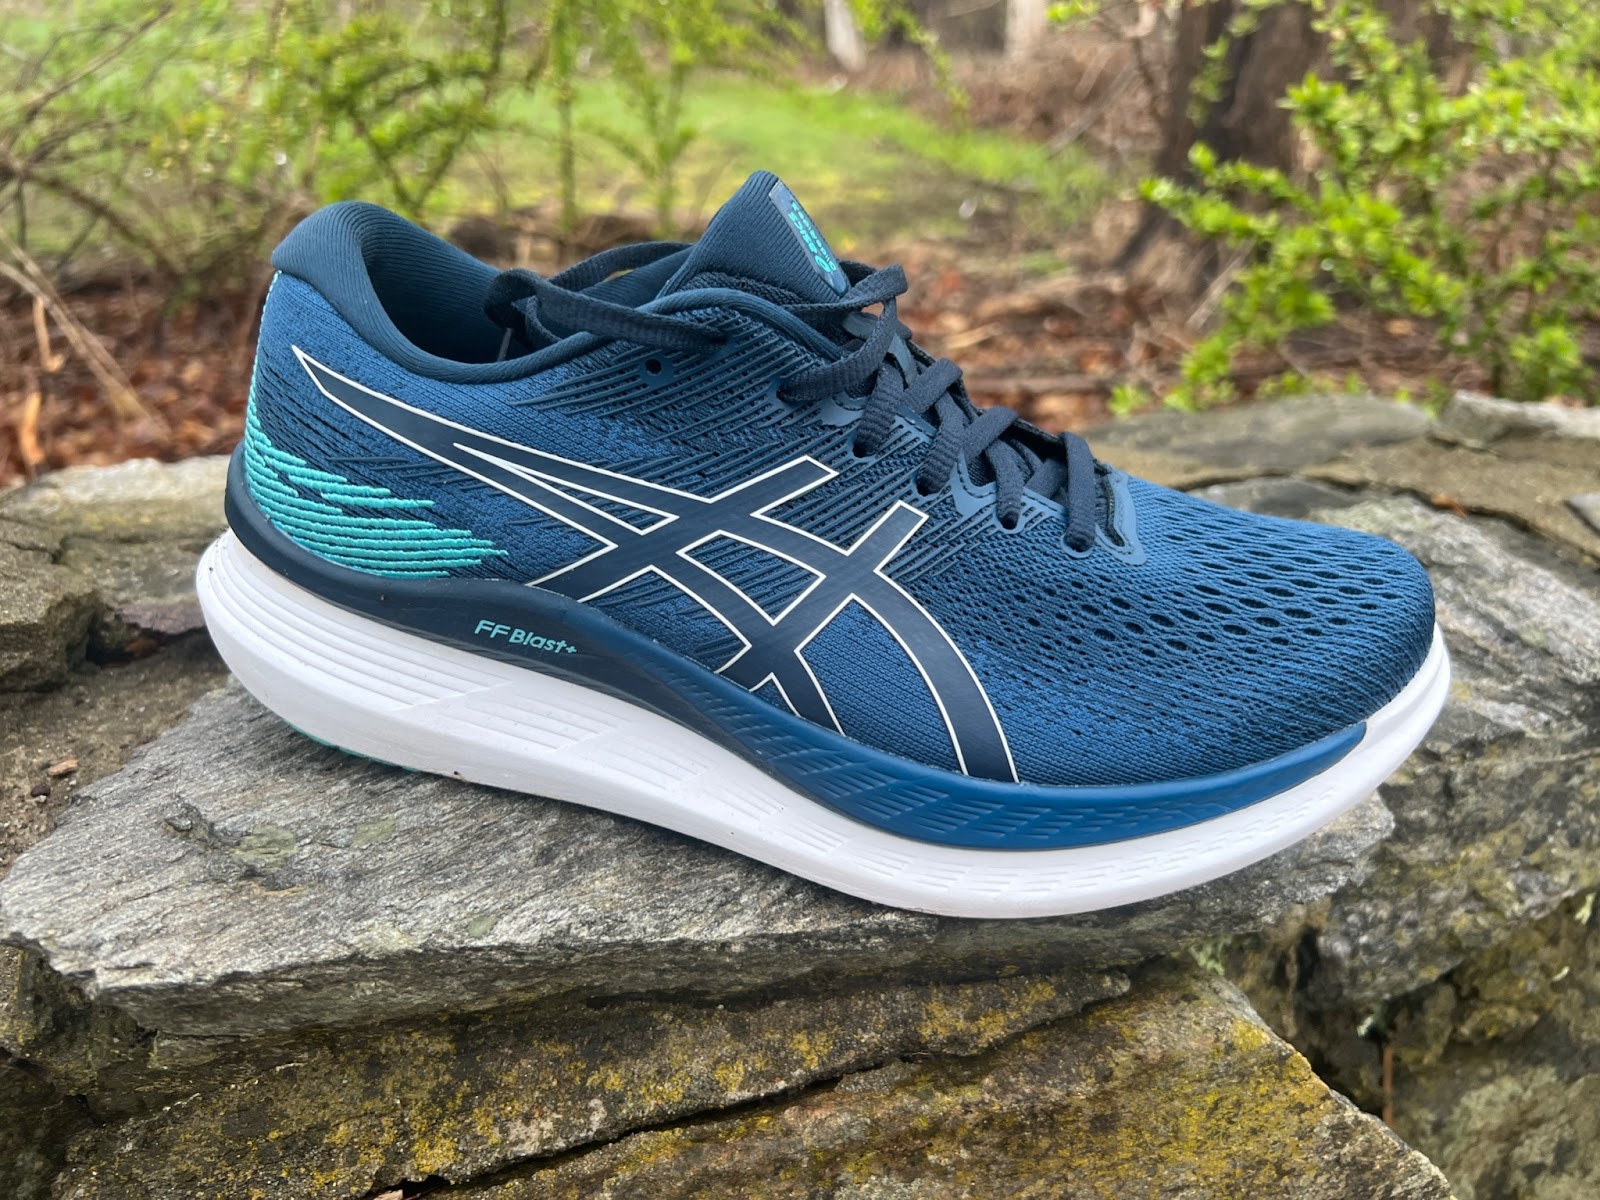 Bebida Tahití Miguel Ángel Road Trail Run: ASICS Glideride 3 Multi Tester Review: What a Pleasant,  Bouncy, Plated, Exciting Surprise! 20 Comparisons